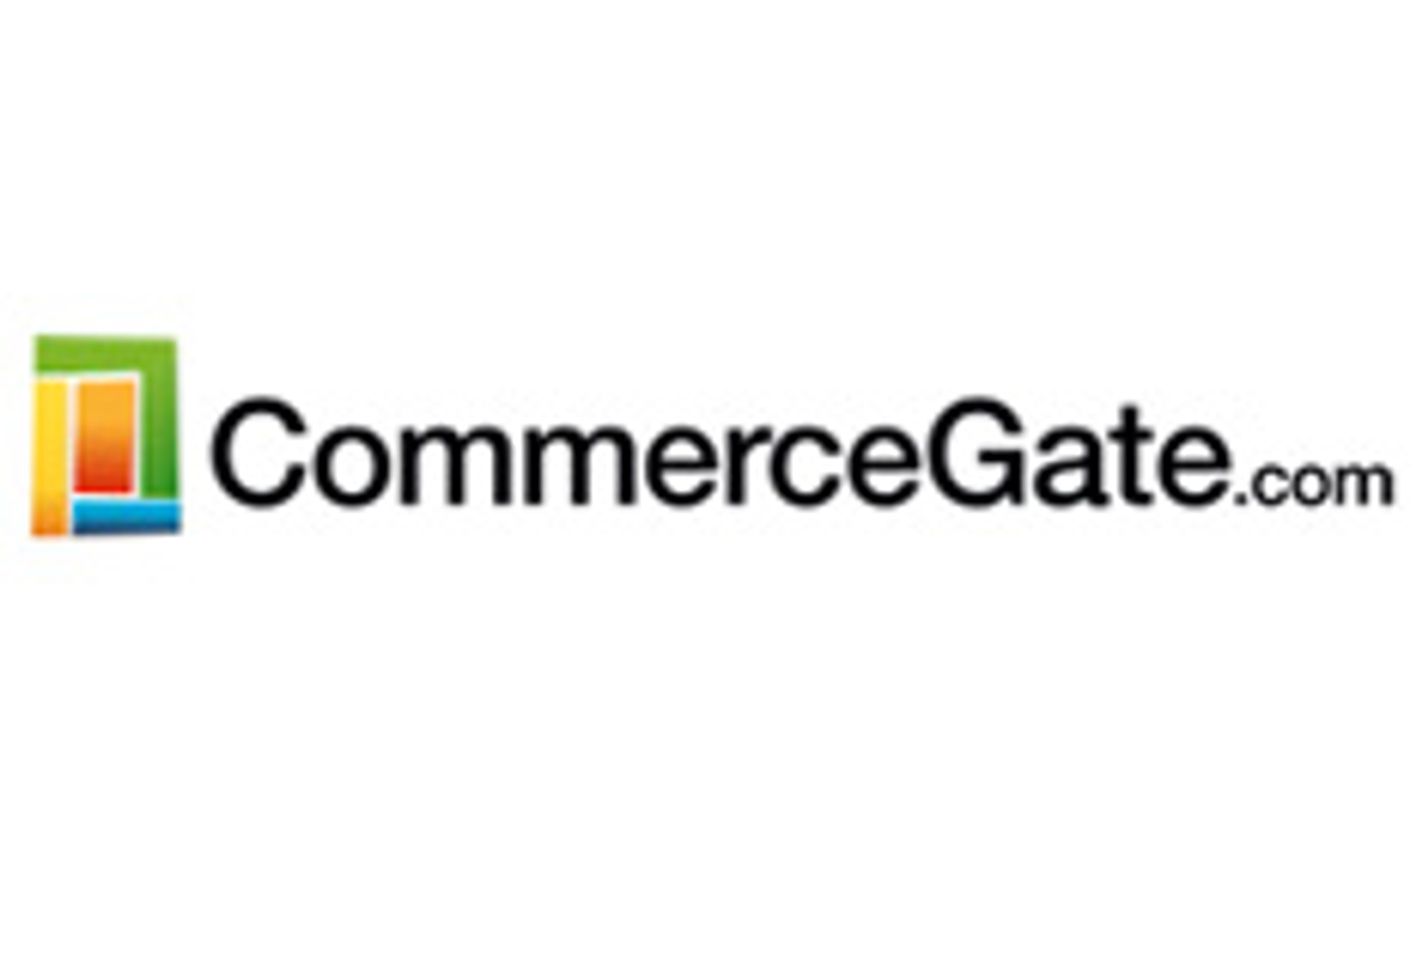 CommerceGate Hits the Ground Running in 2013